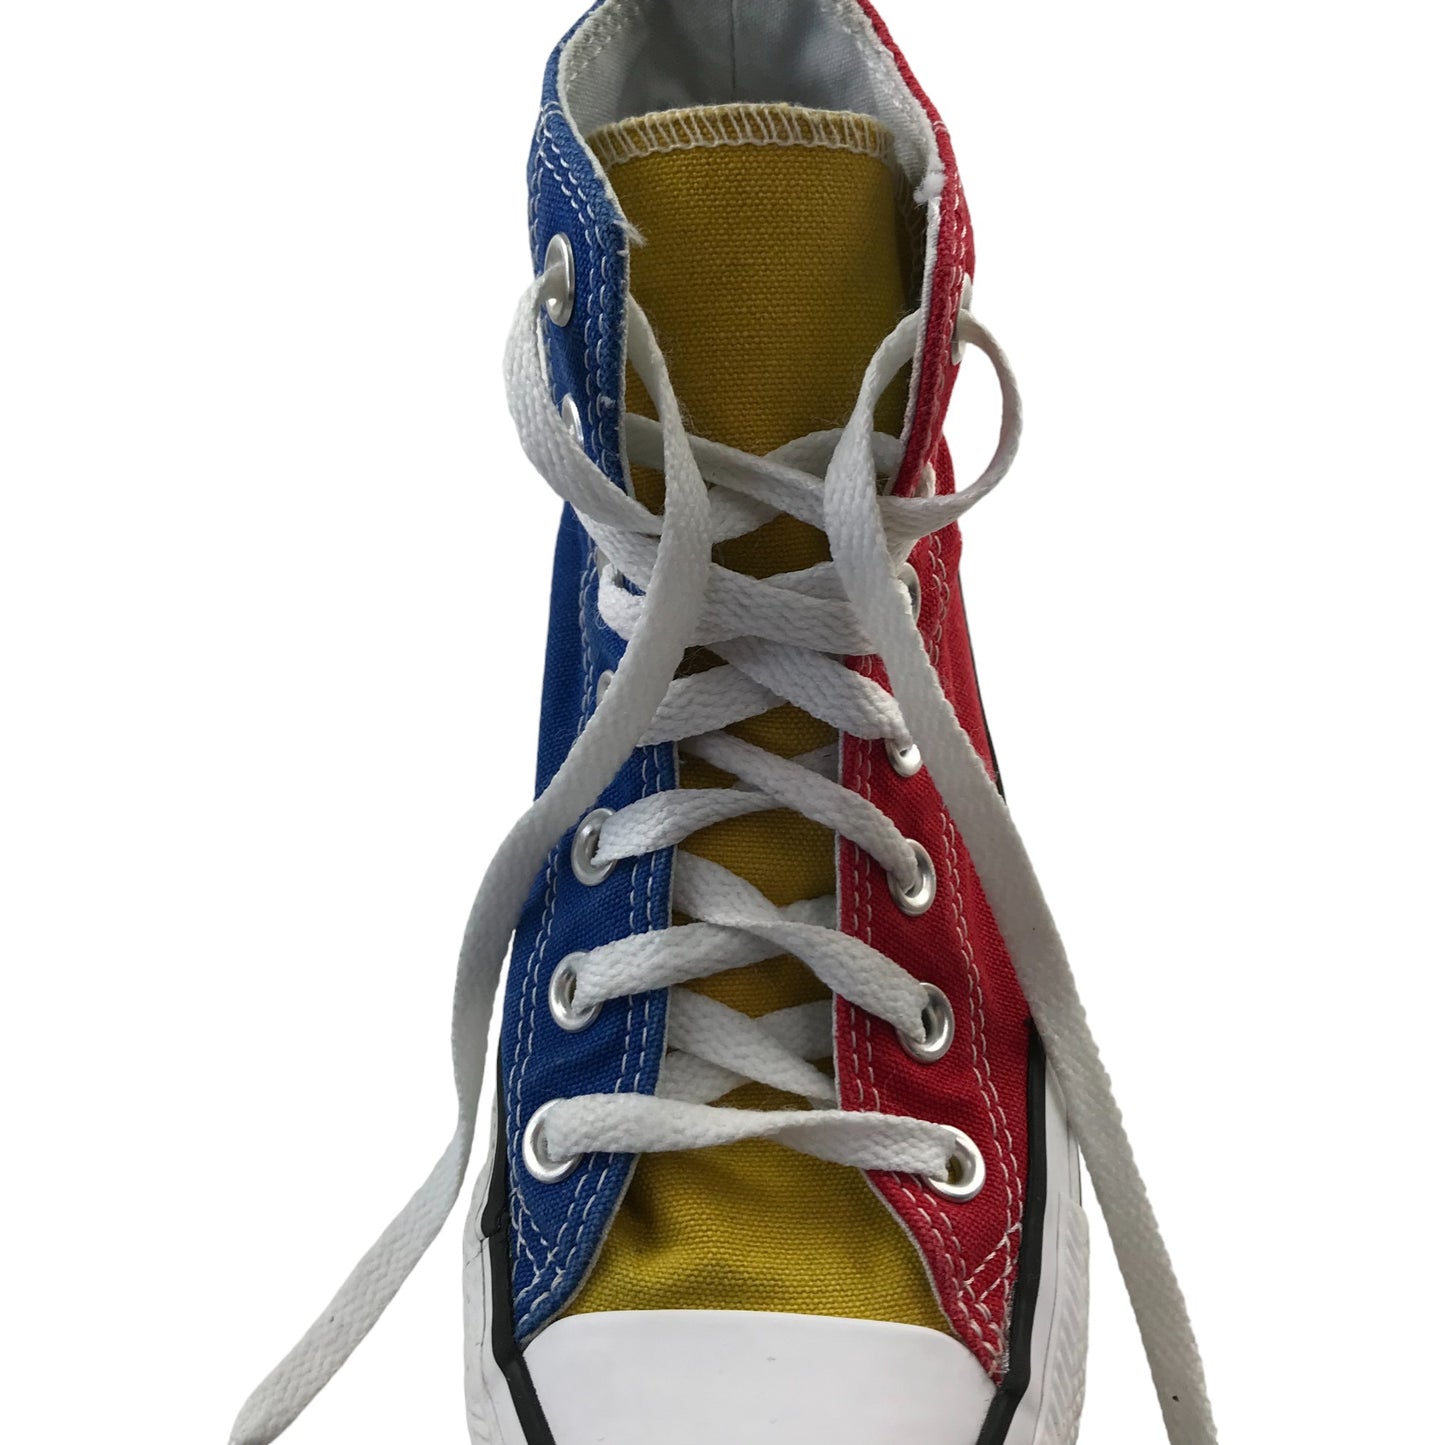 Converse Trainers Shoe Size 3 Blue Yellow and Red Panelled All Star Chuck Taylor High Top